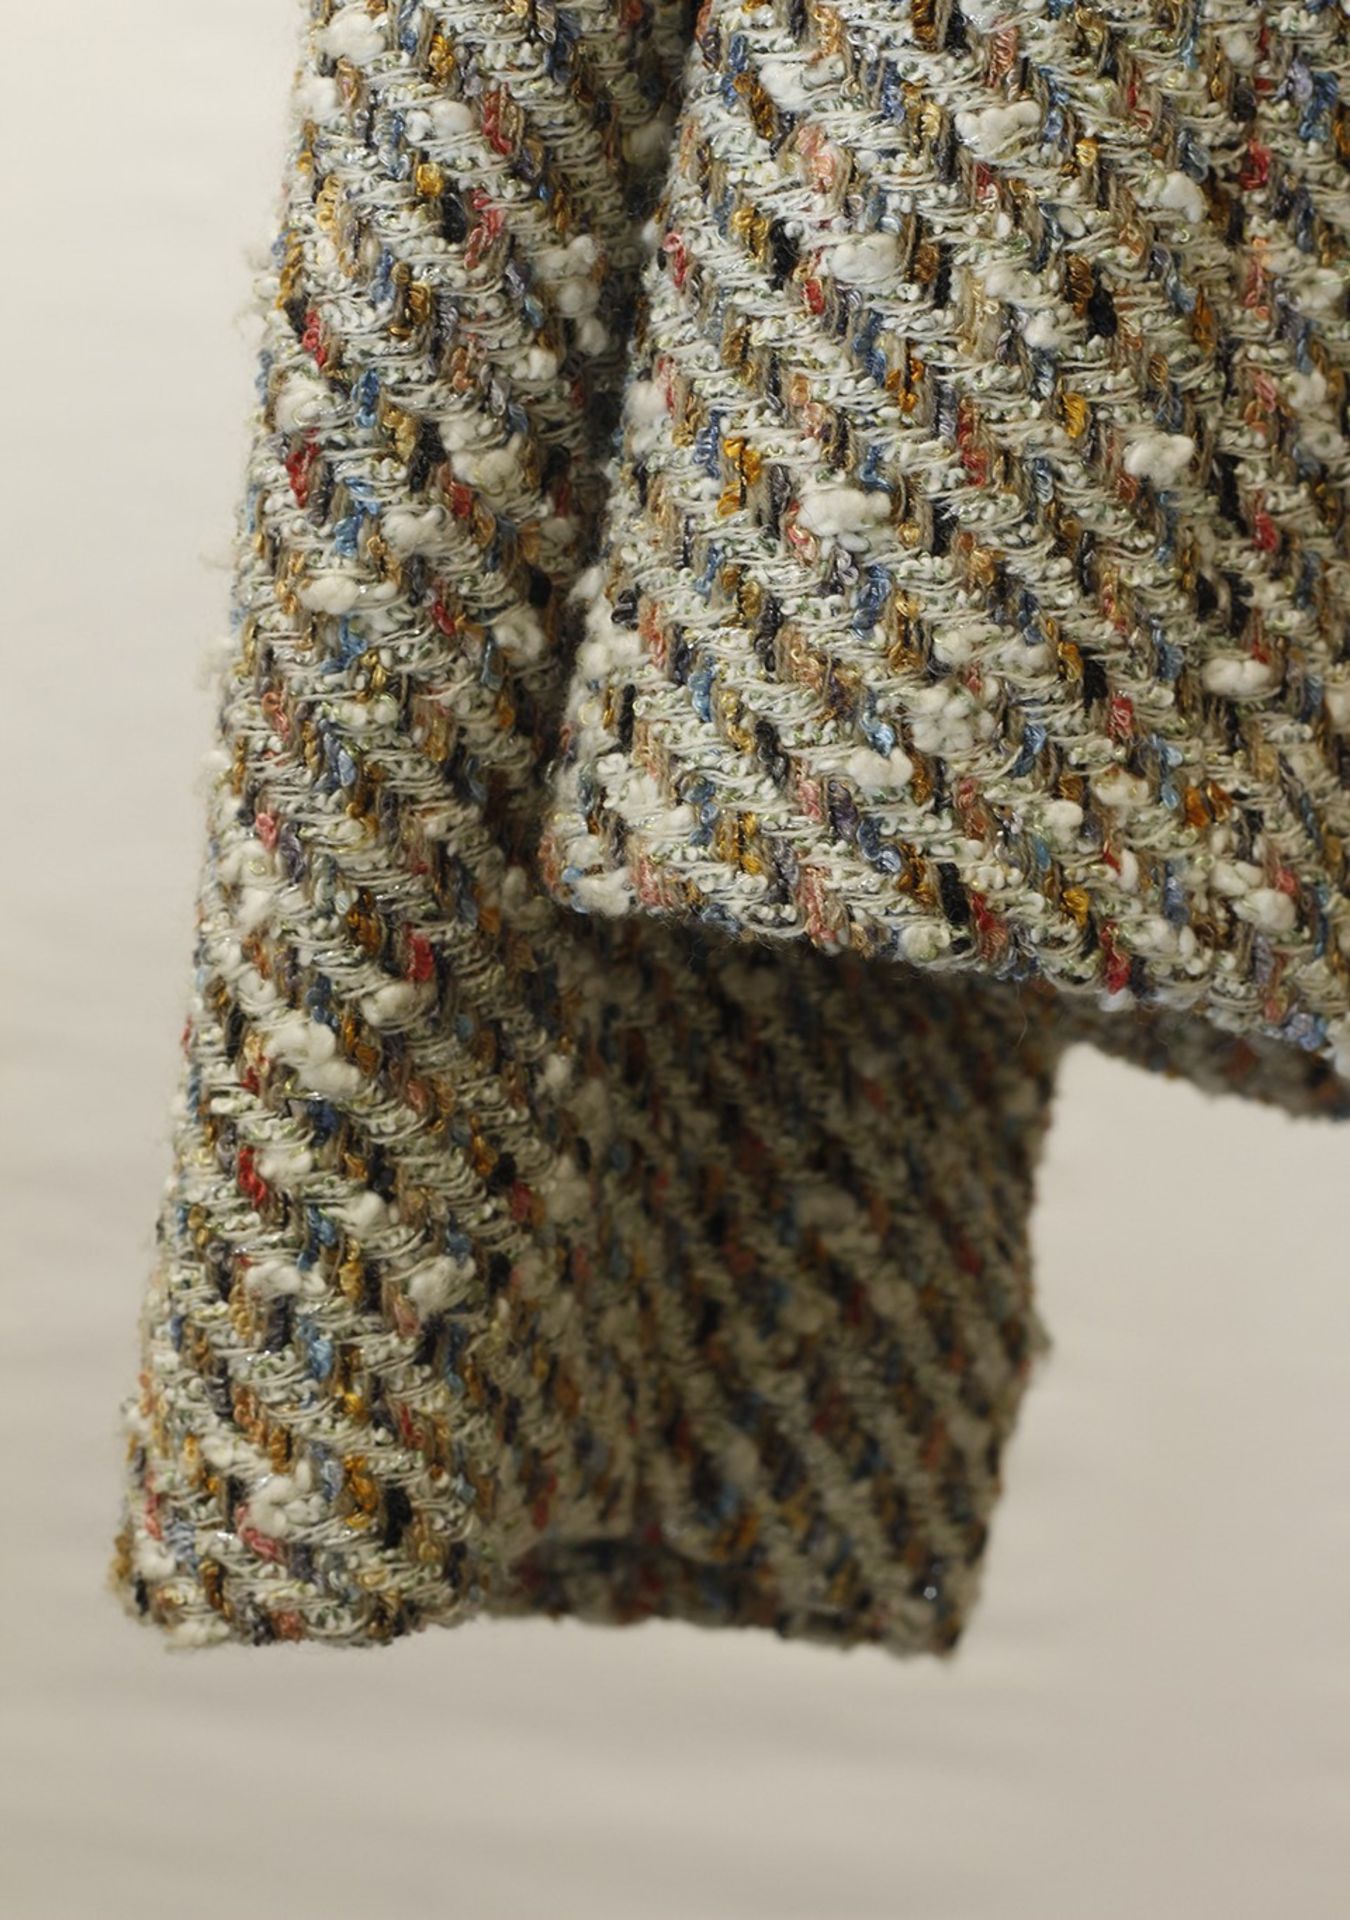 1 x Anne Belin Multicolour Tweed Jacket - Size: 24 - Material: 50% Polyacrylic, 25% Viscose, 25% - Image 4 of 6